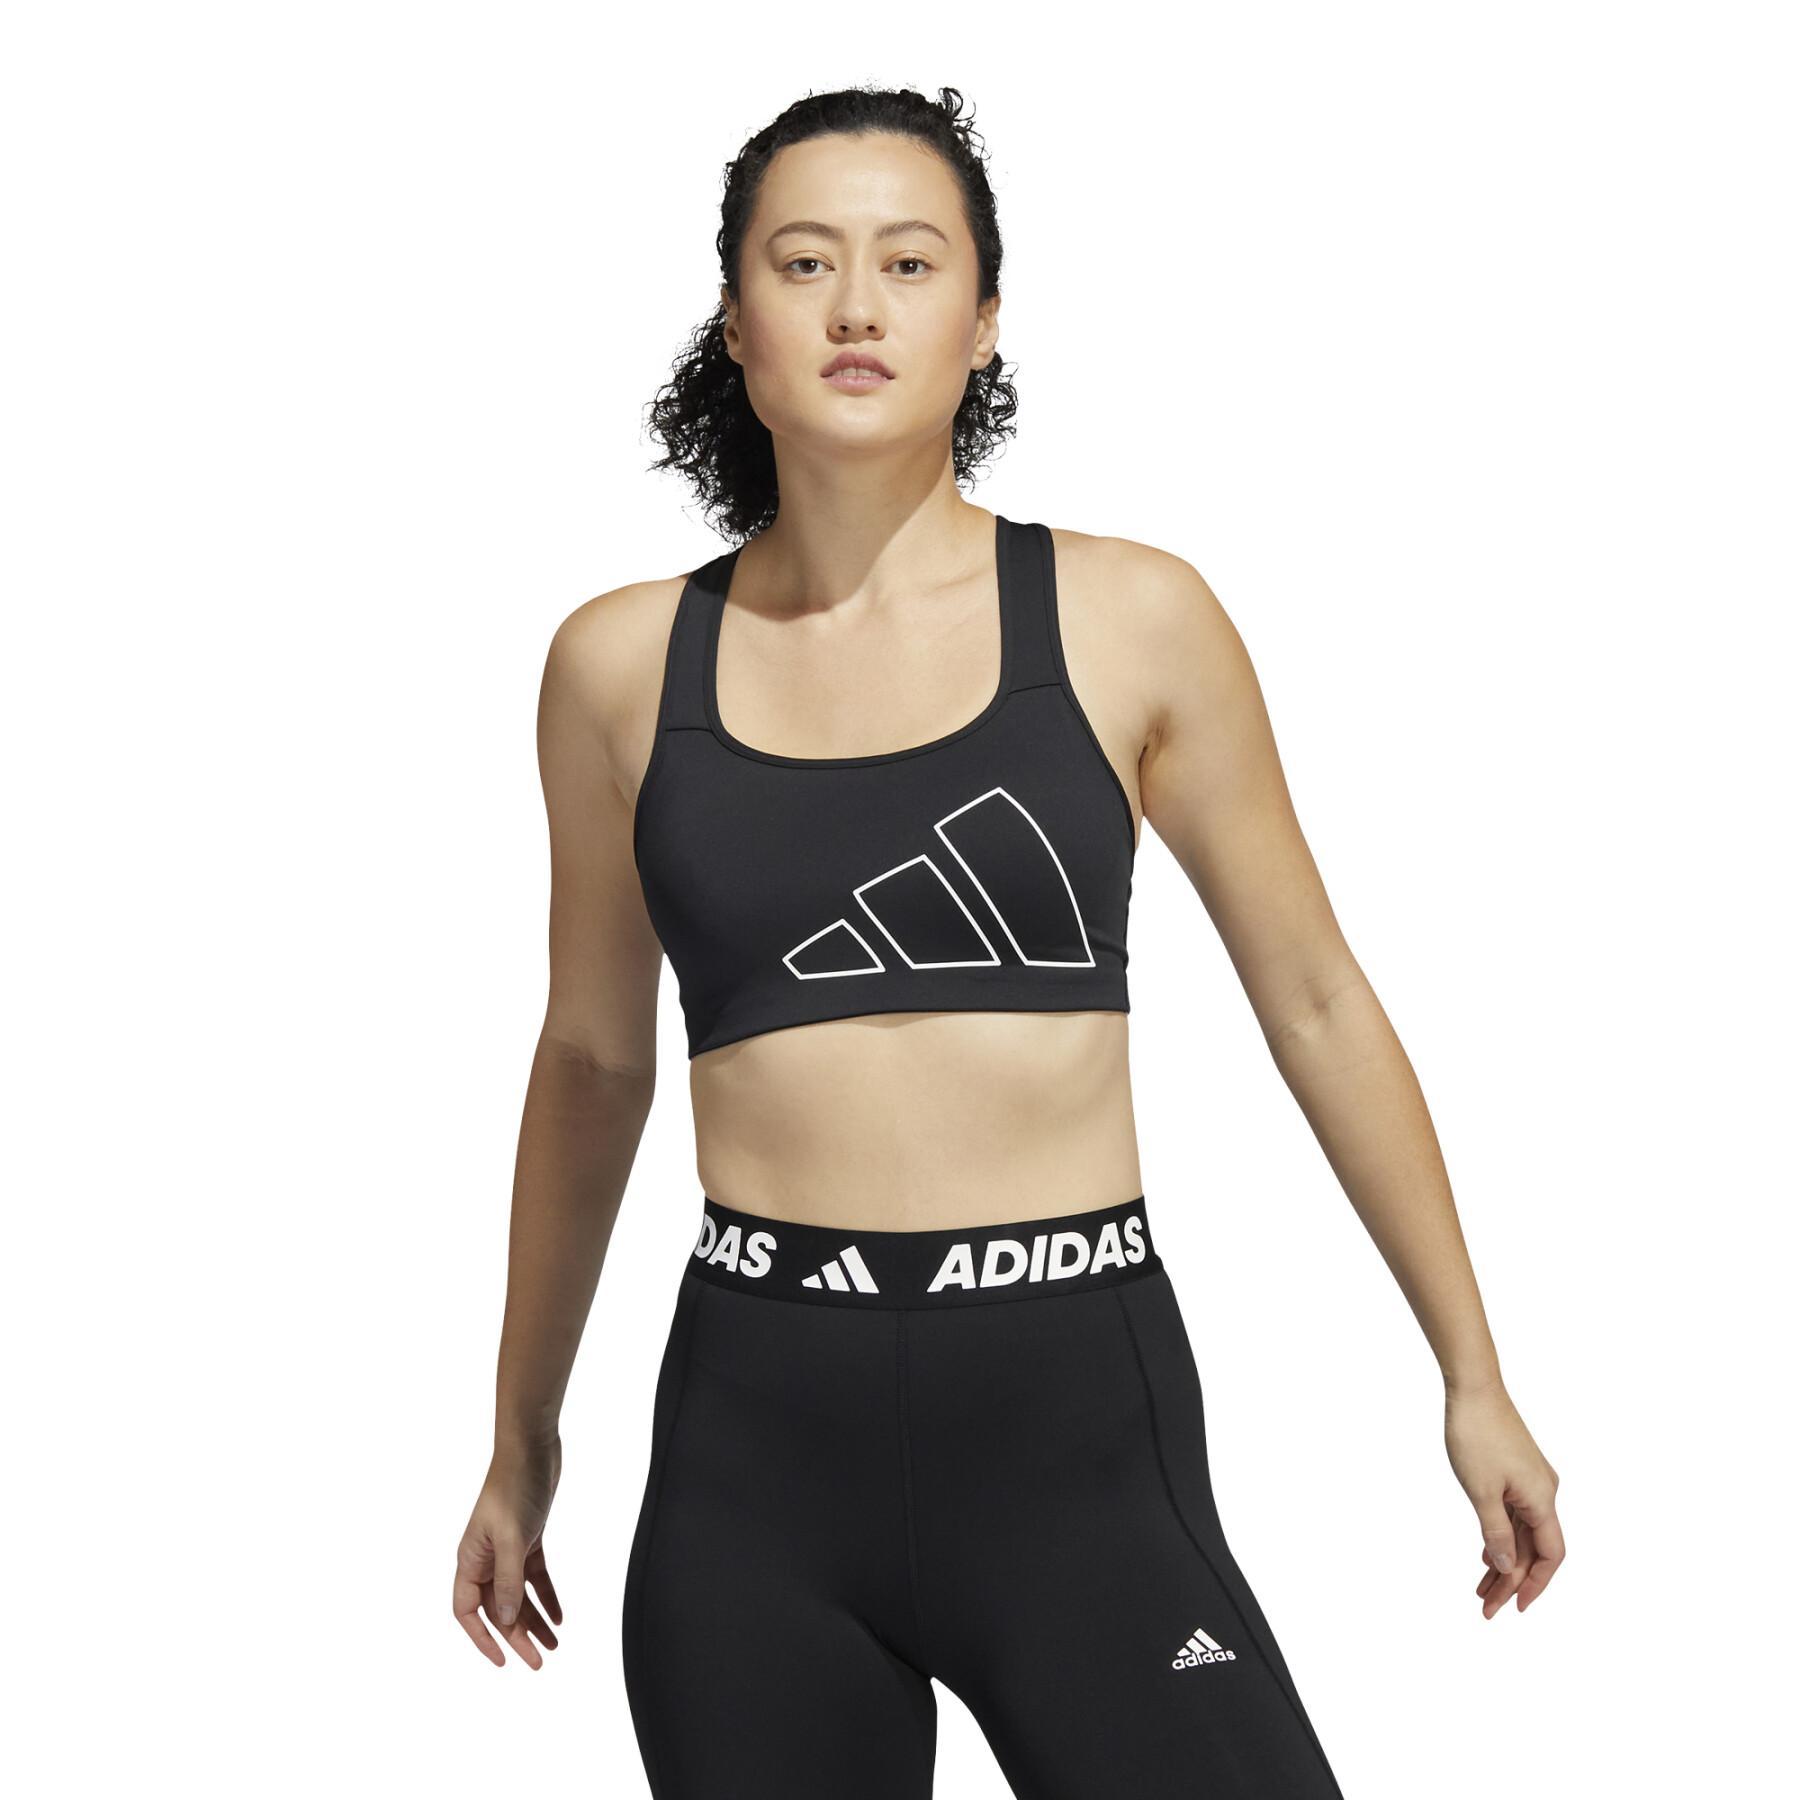 Women's Clothing - adidas TLRD Impact Training High-Support Bra